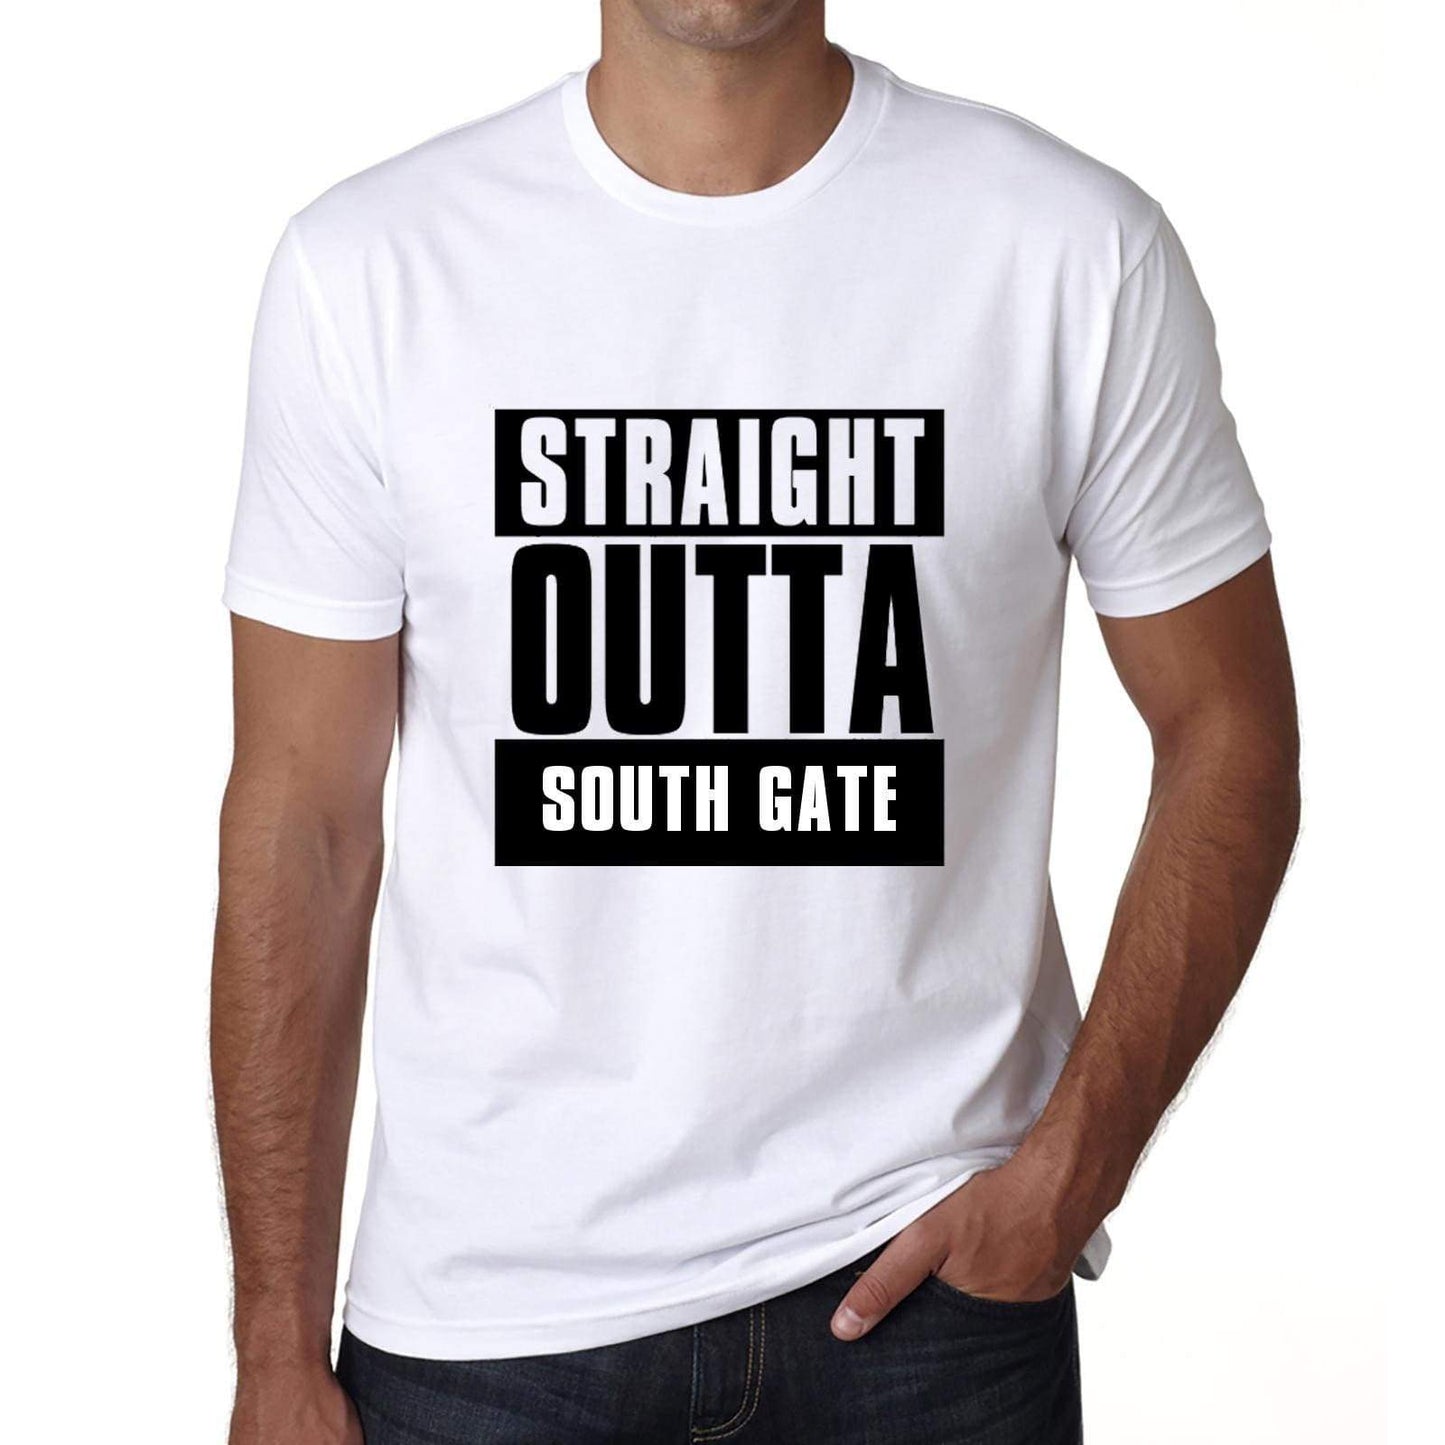 Straight Outta South Gate Mens Short Sleeve Round Neck T-Shirt 00027 - White / S - Casual